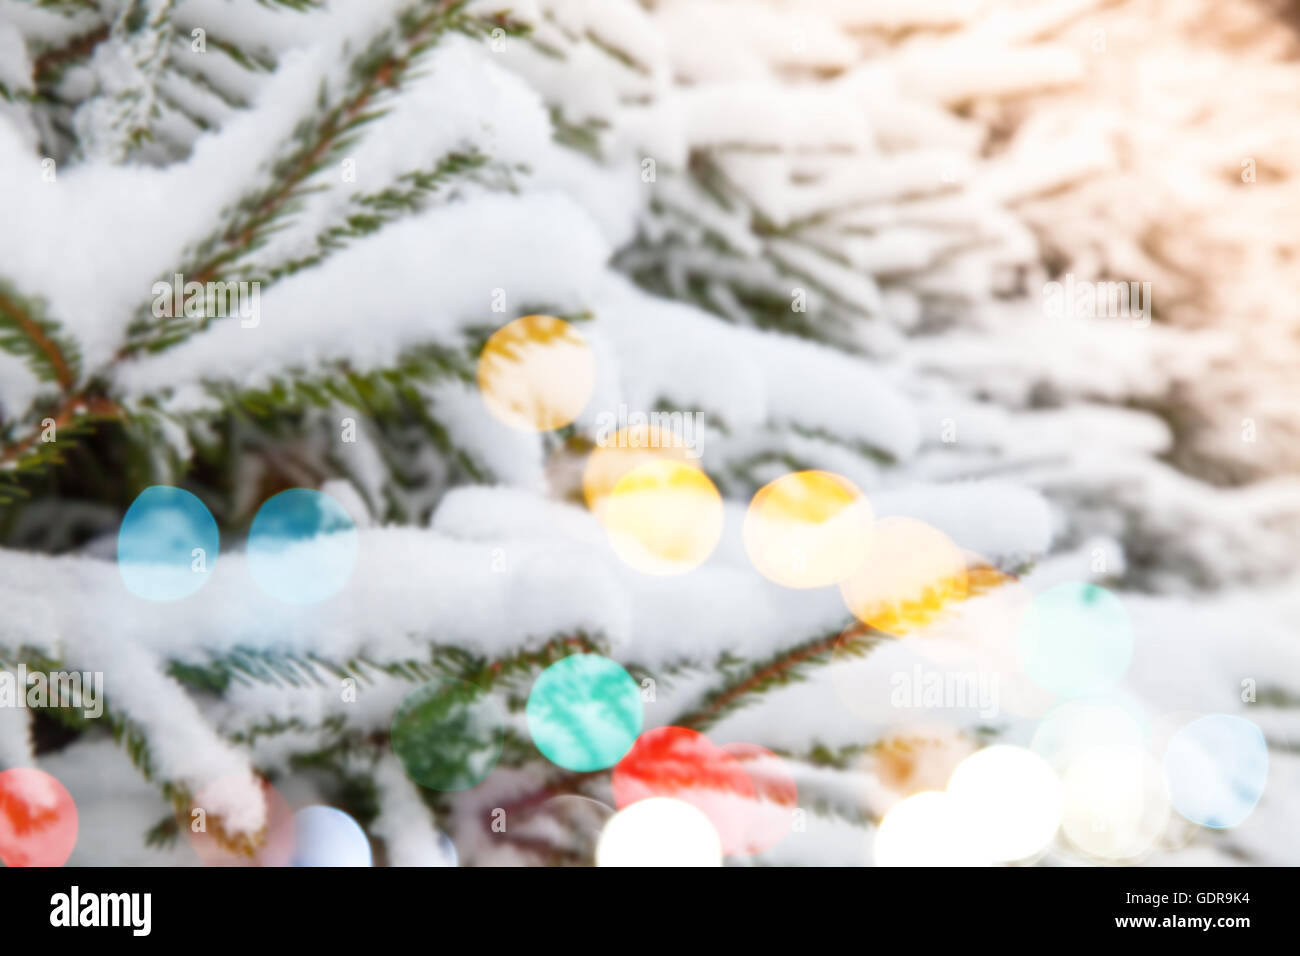 Spruce branches covered with snow, blurred refocused photo with bokeh of colorful lights Stock Photo